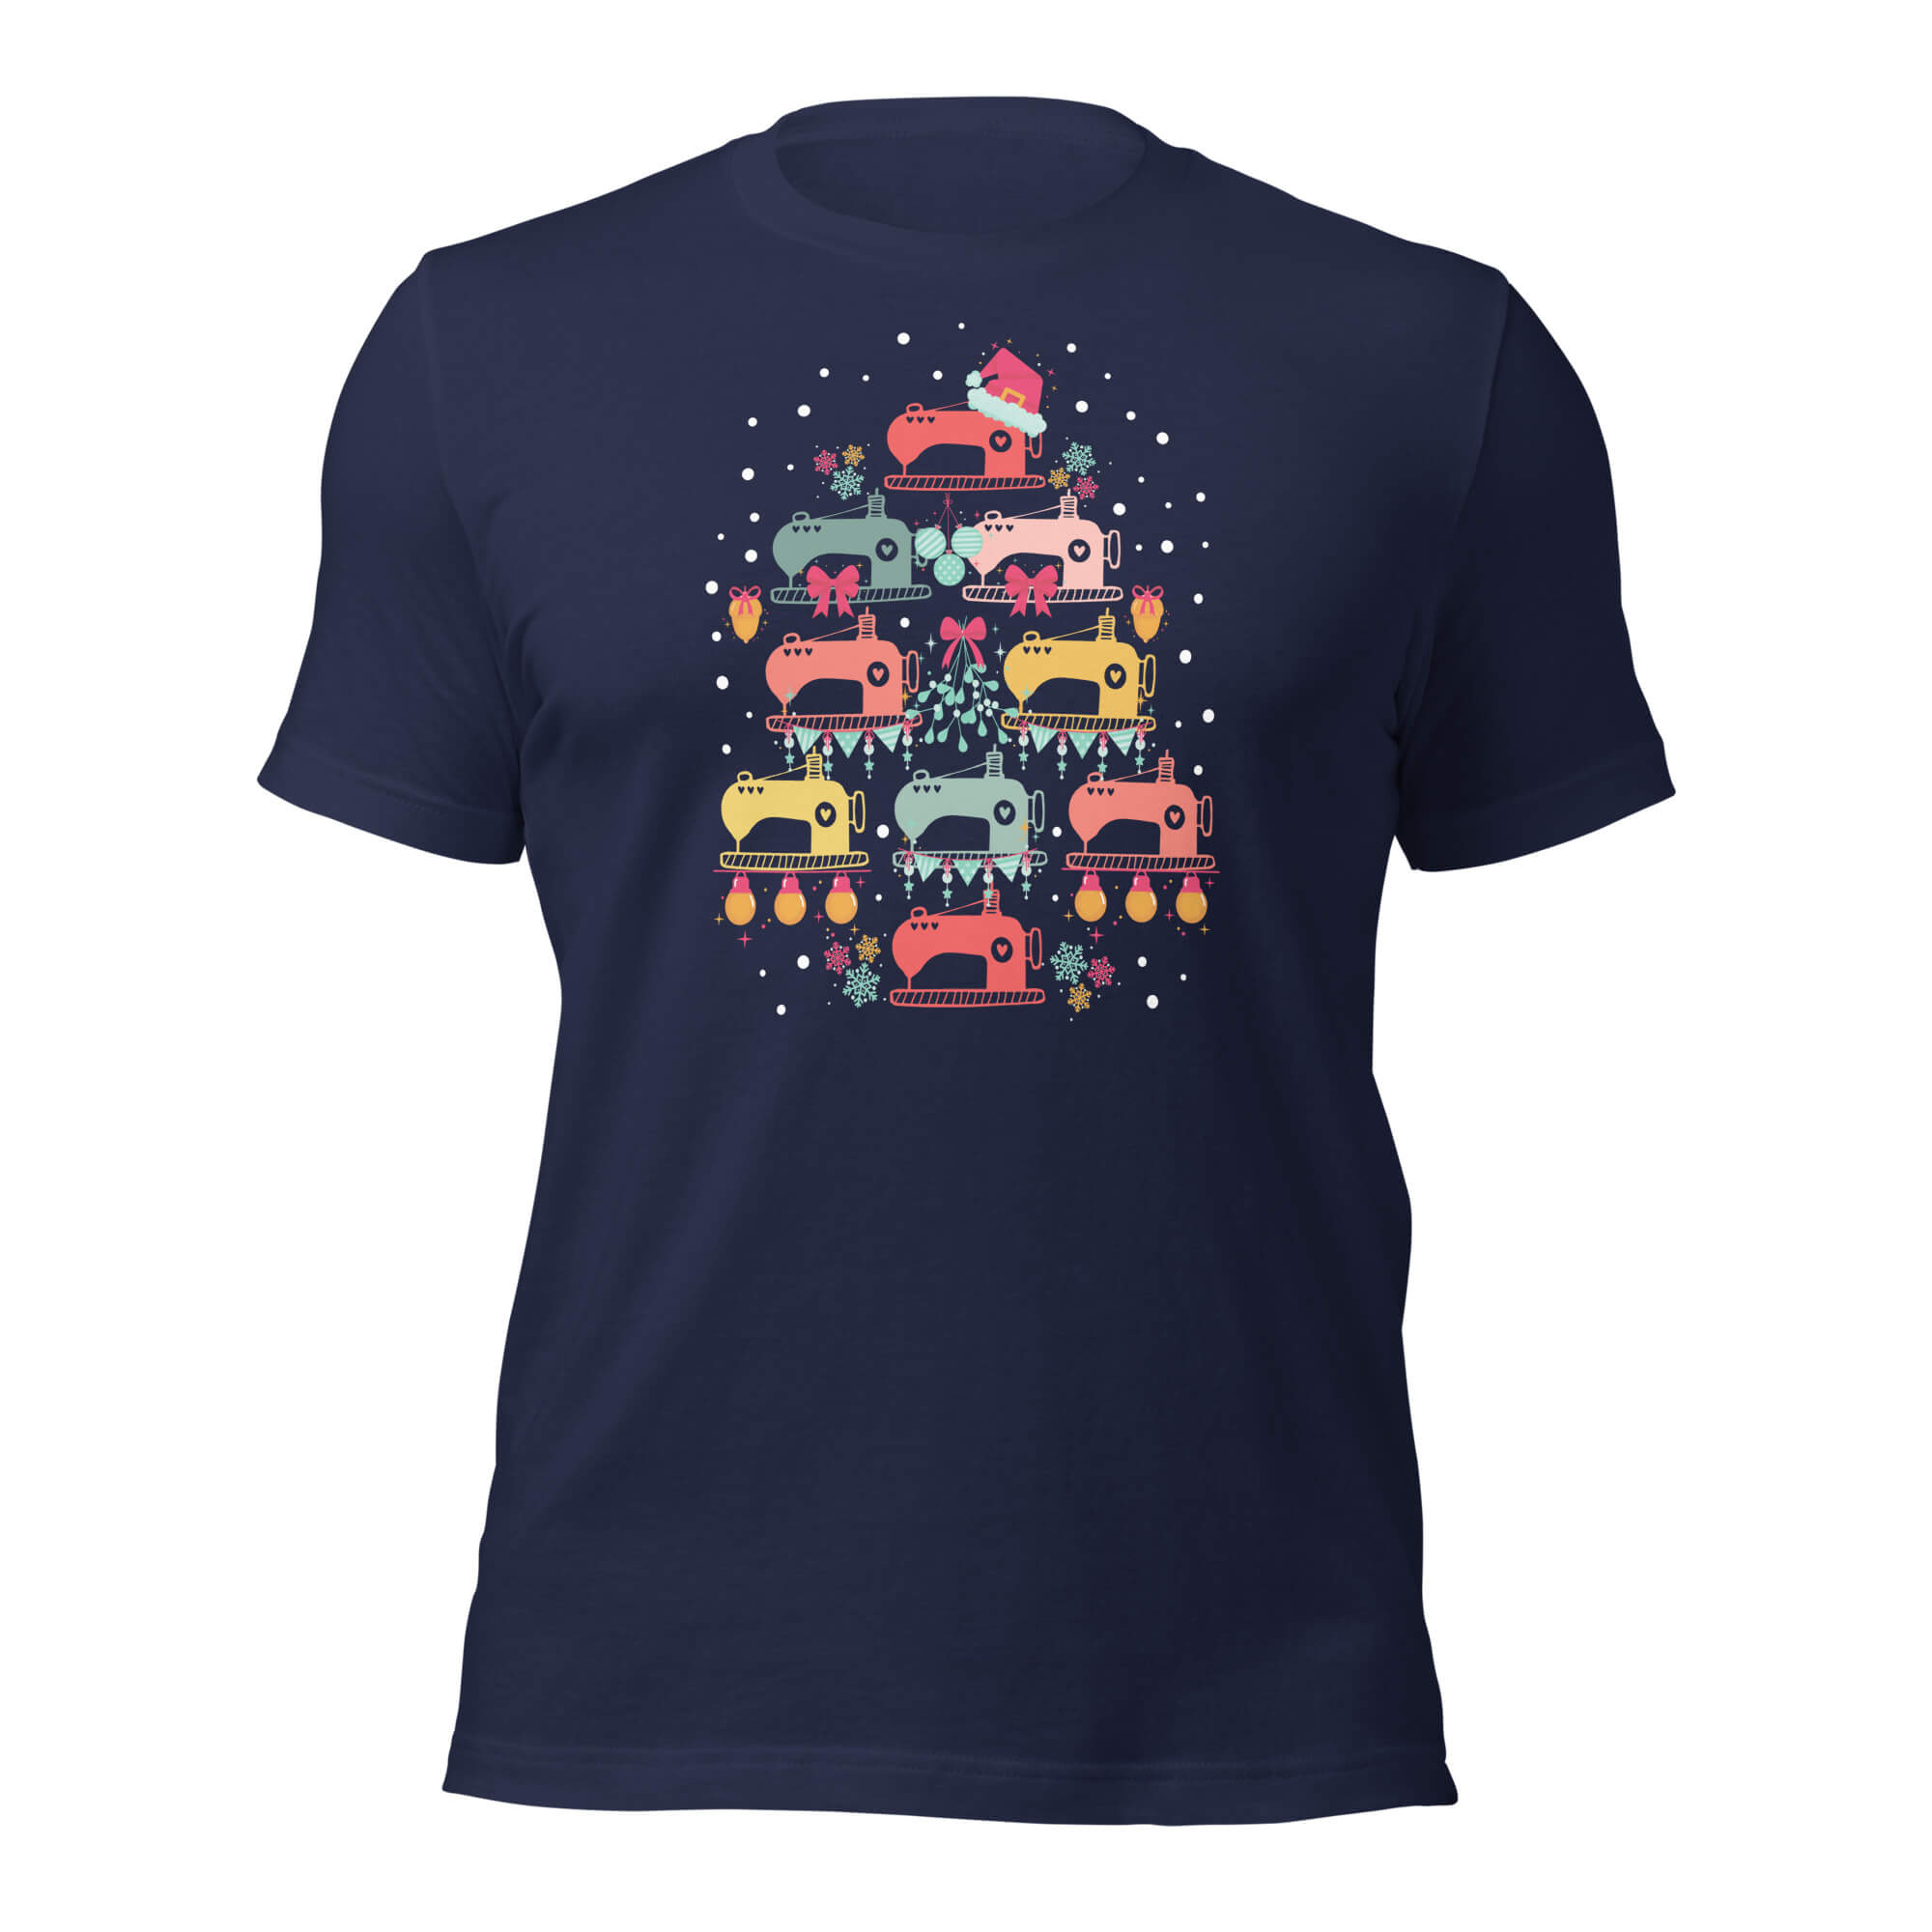    mommy-and-me-sewing-machine-christmas-tree-t-shirt-navy